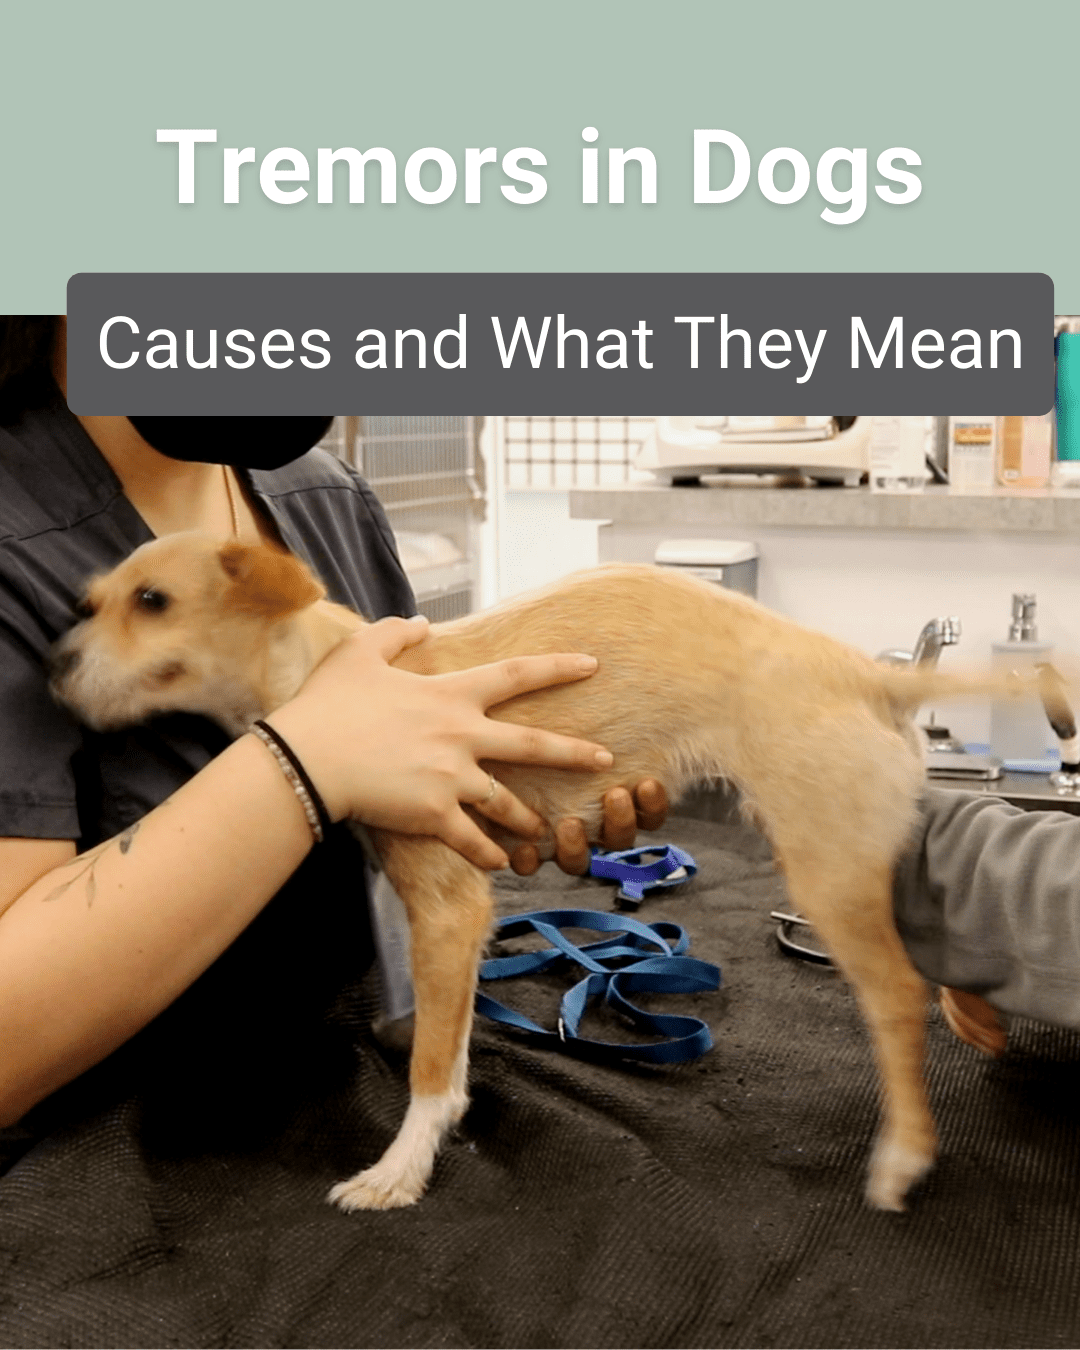 Tremors in Dogs: Causes and What They Mean